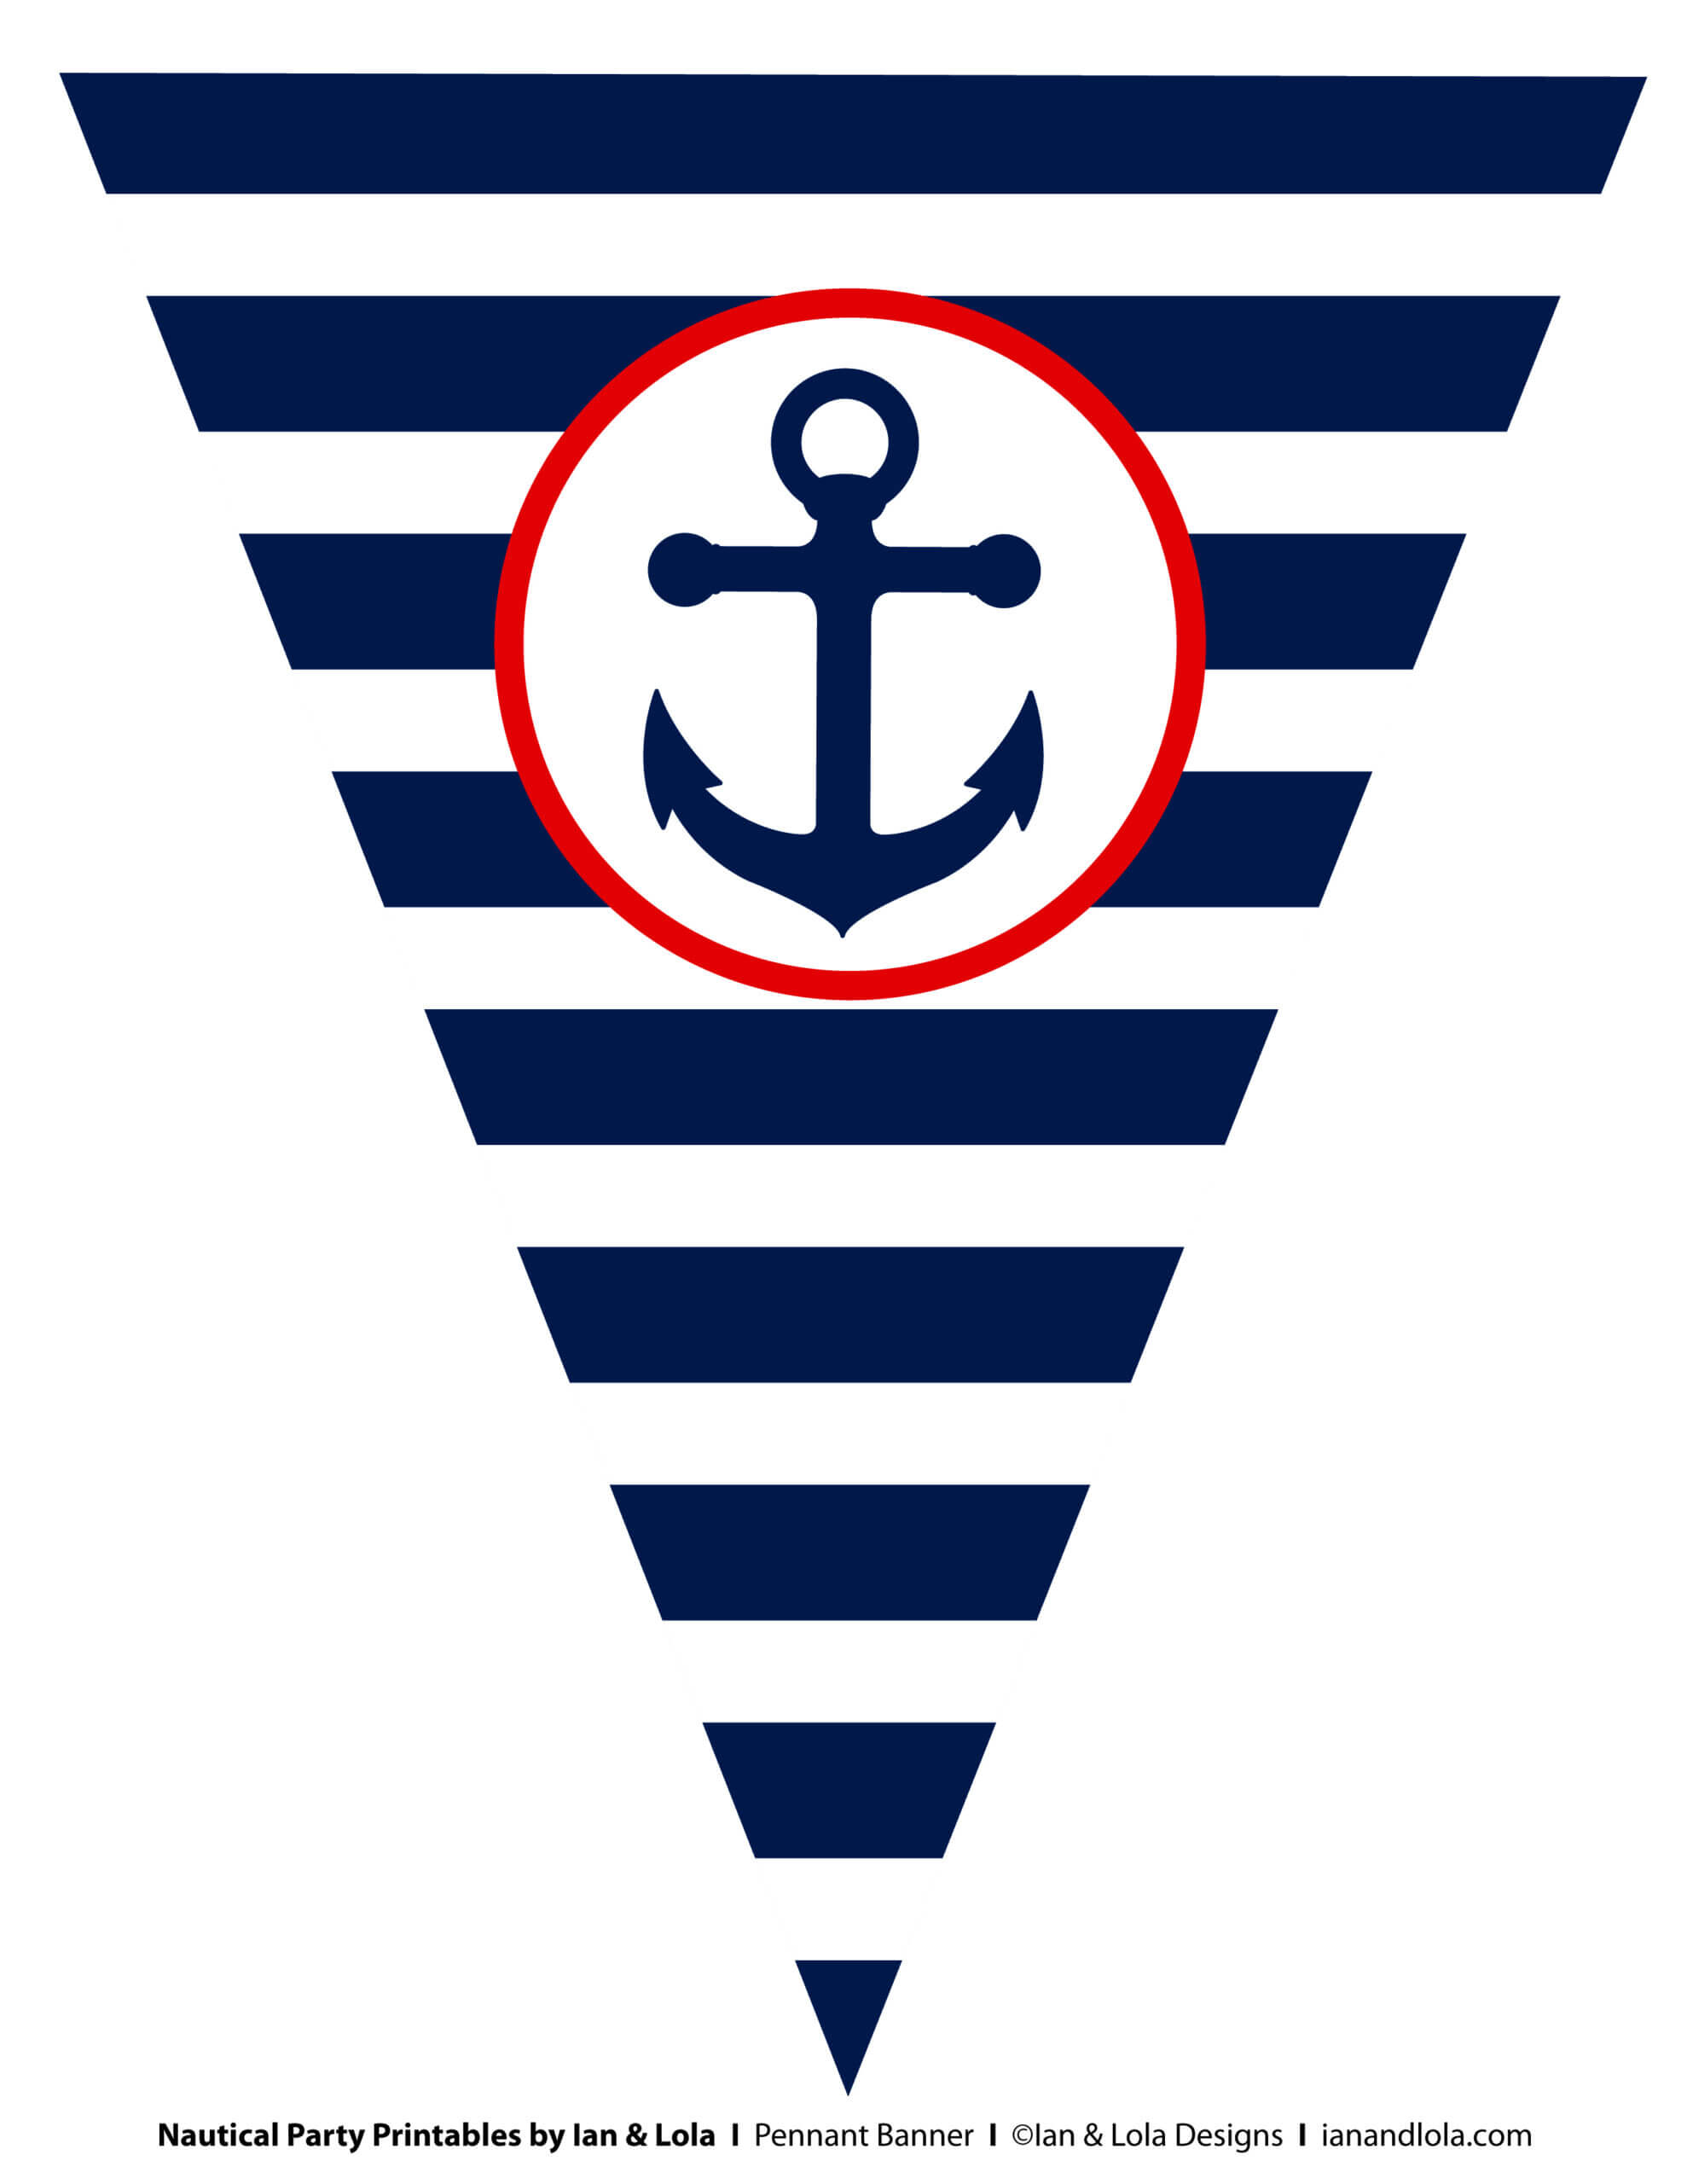 Free Nautical Party Printables From Ian & Lola Designs With Regard To Nautical Banner Template